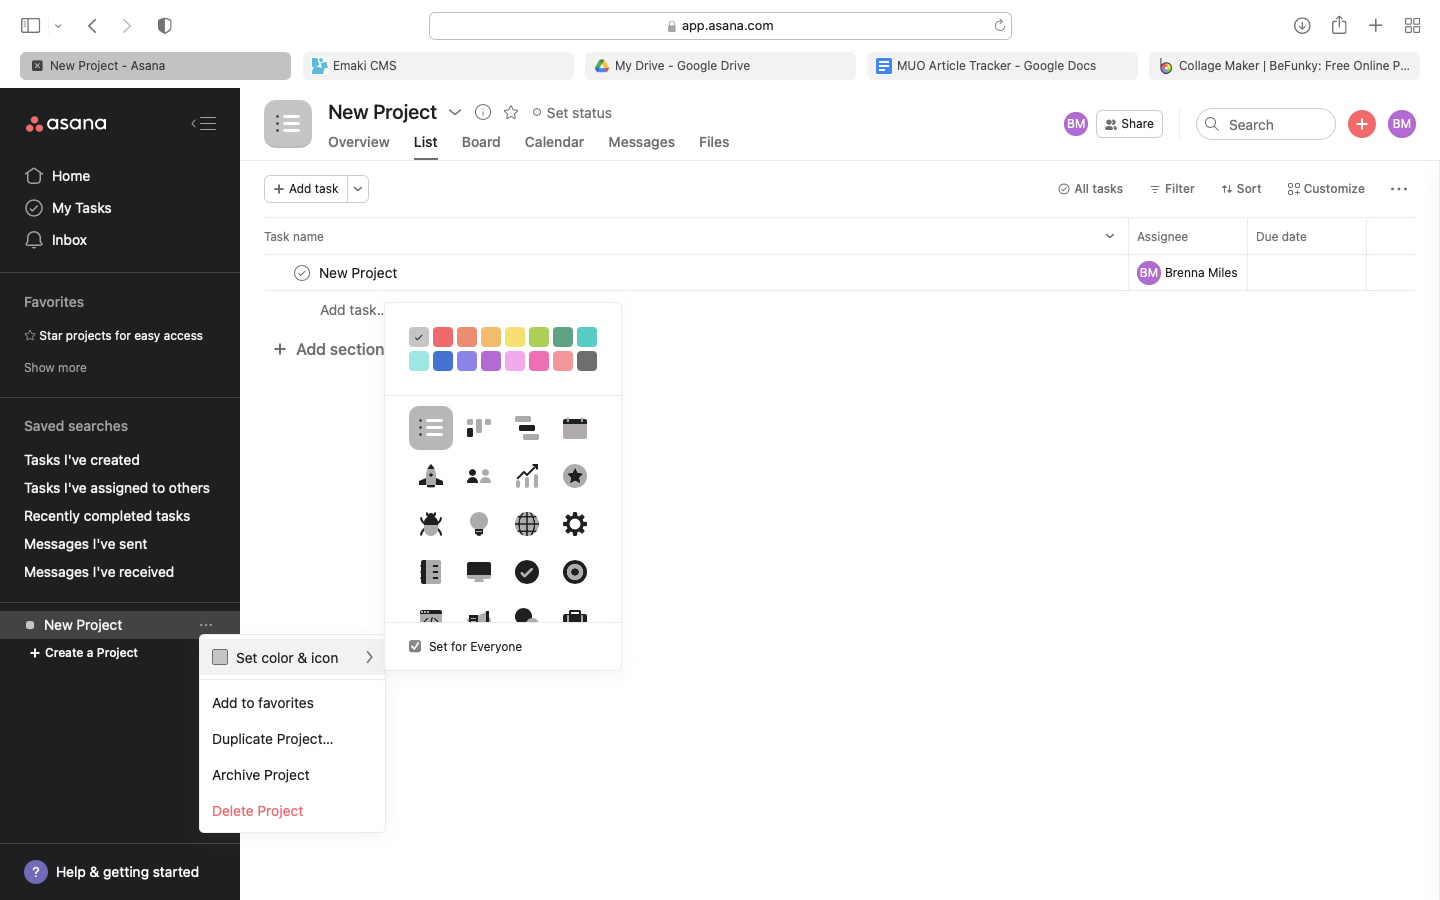 Image shows color coding of projects inside of Asana